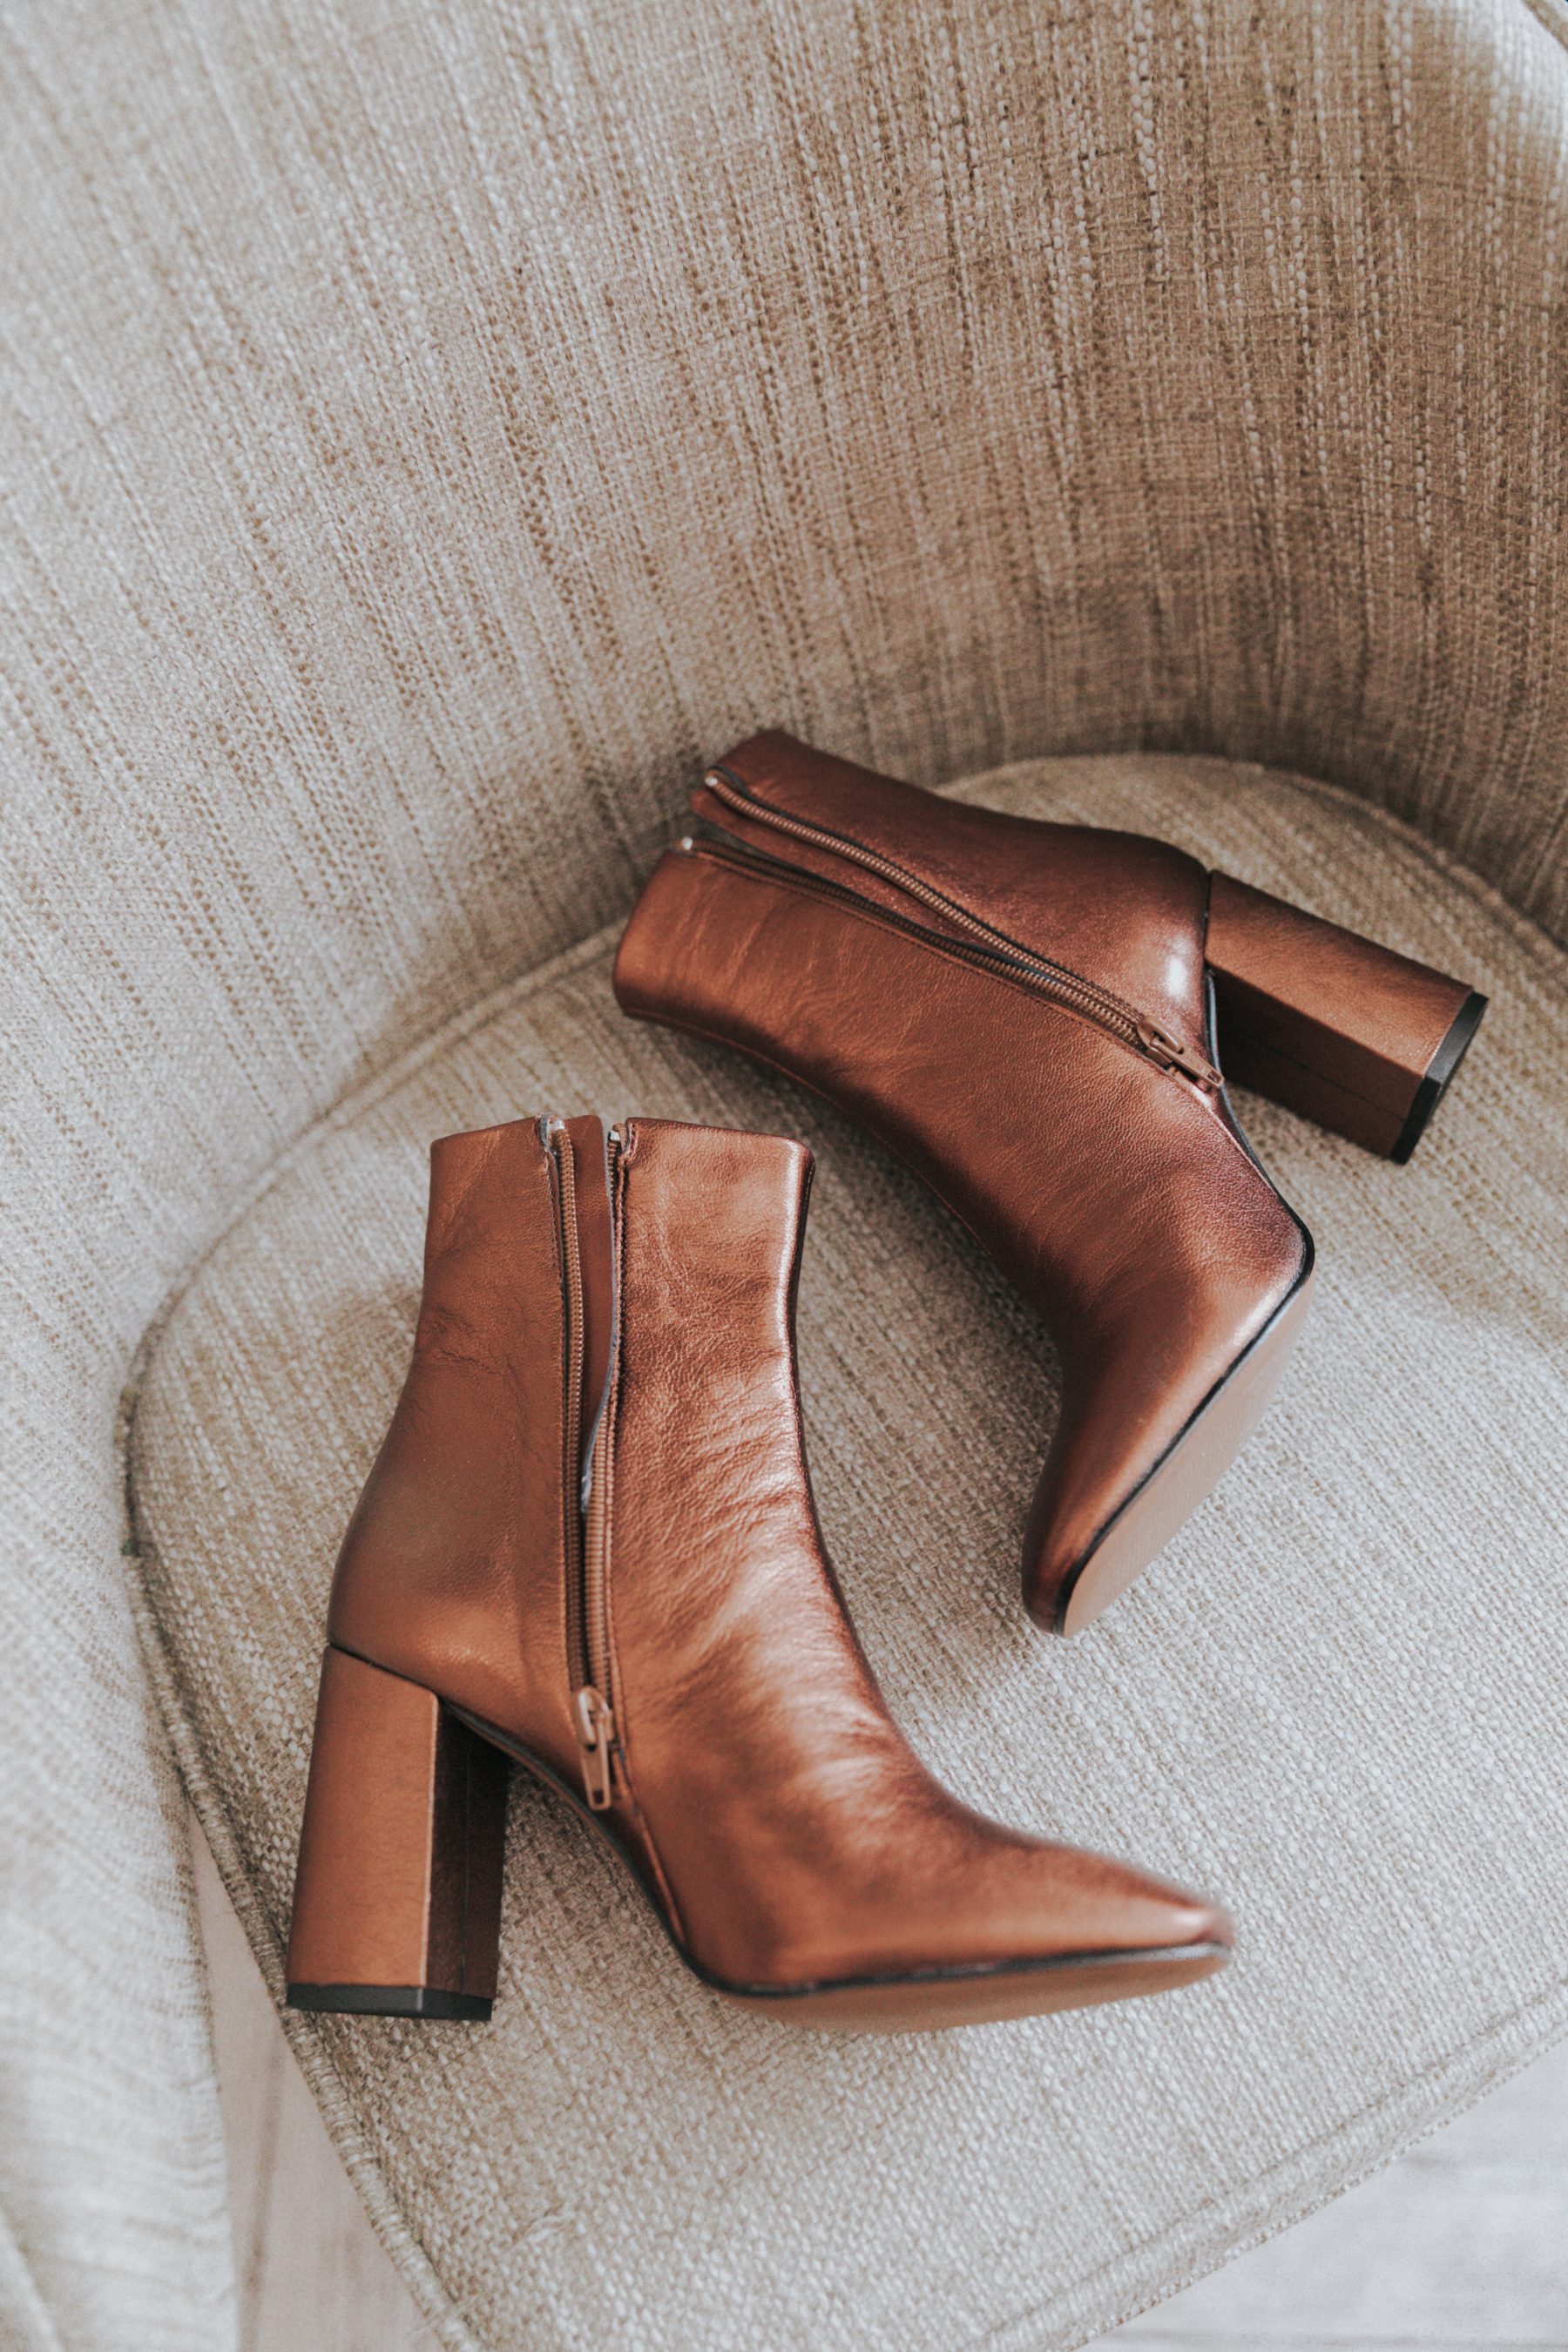 The perfect Booties